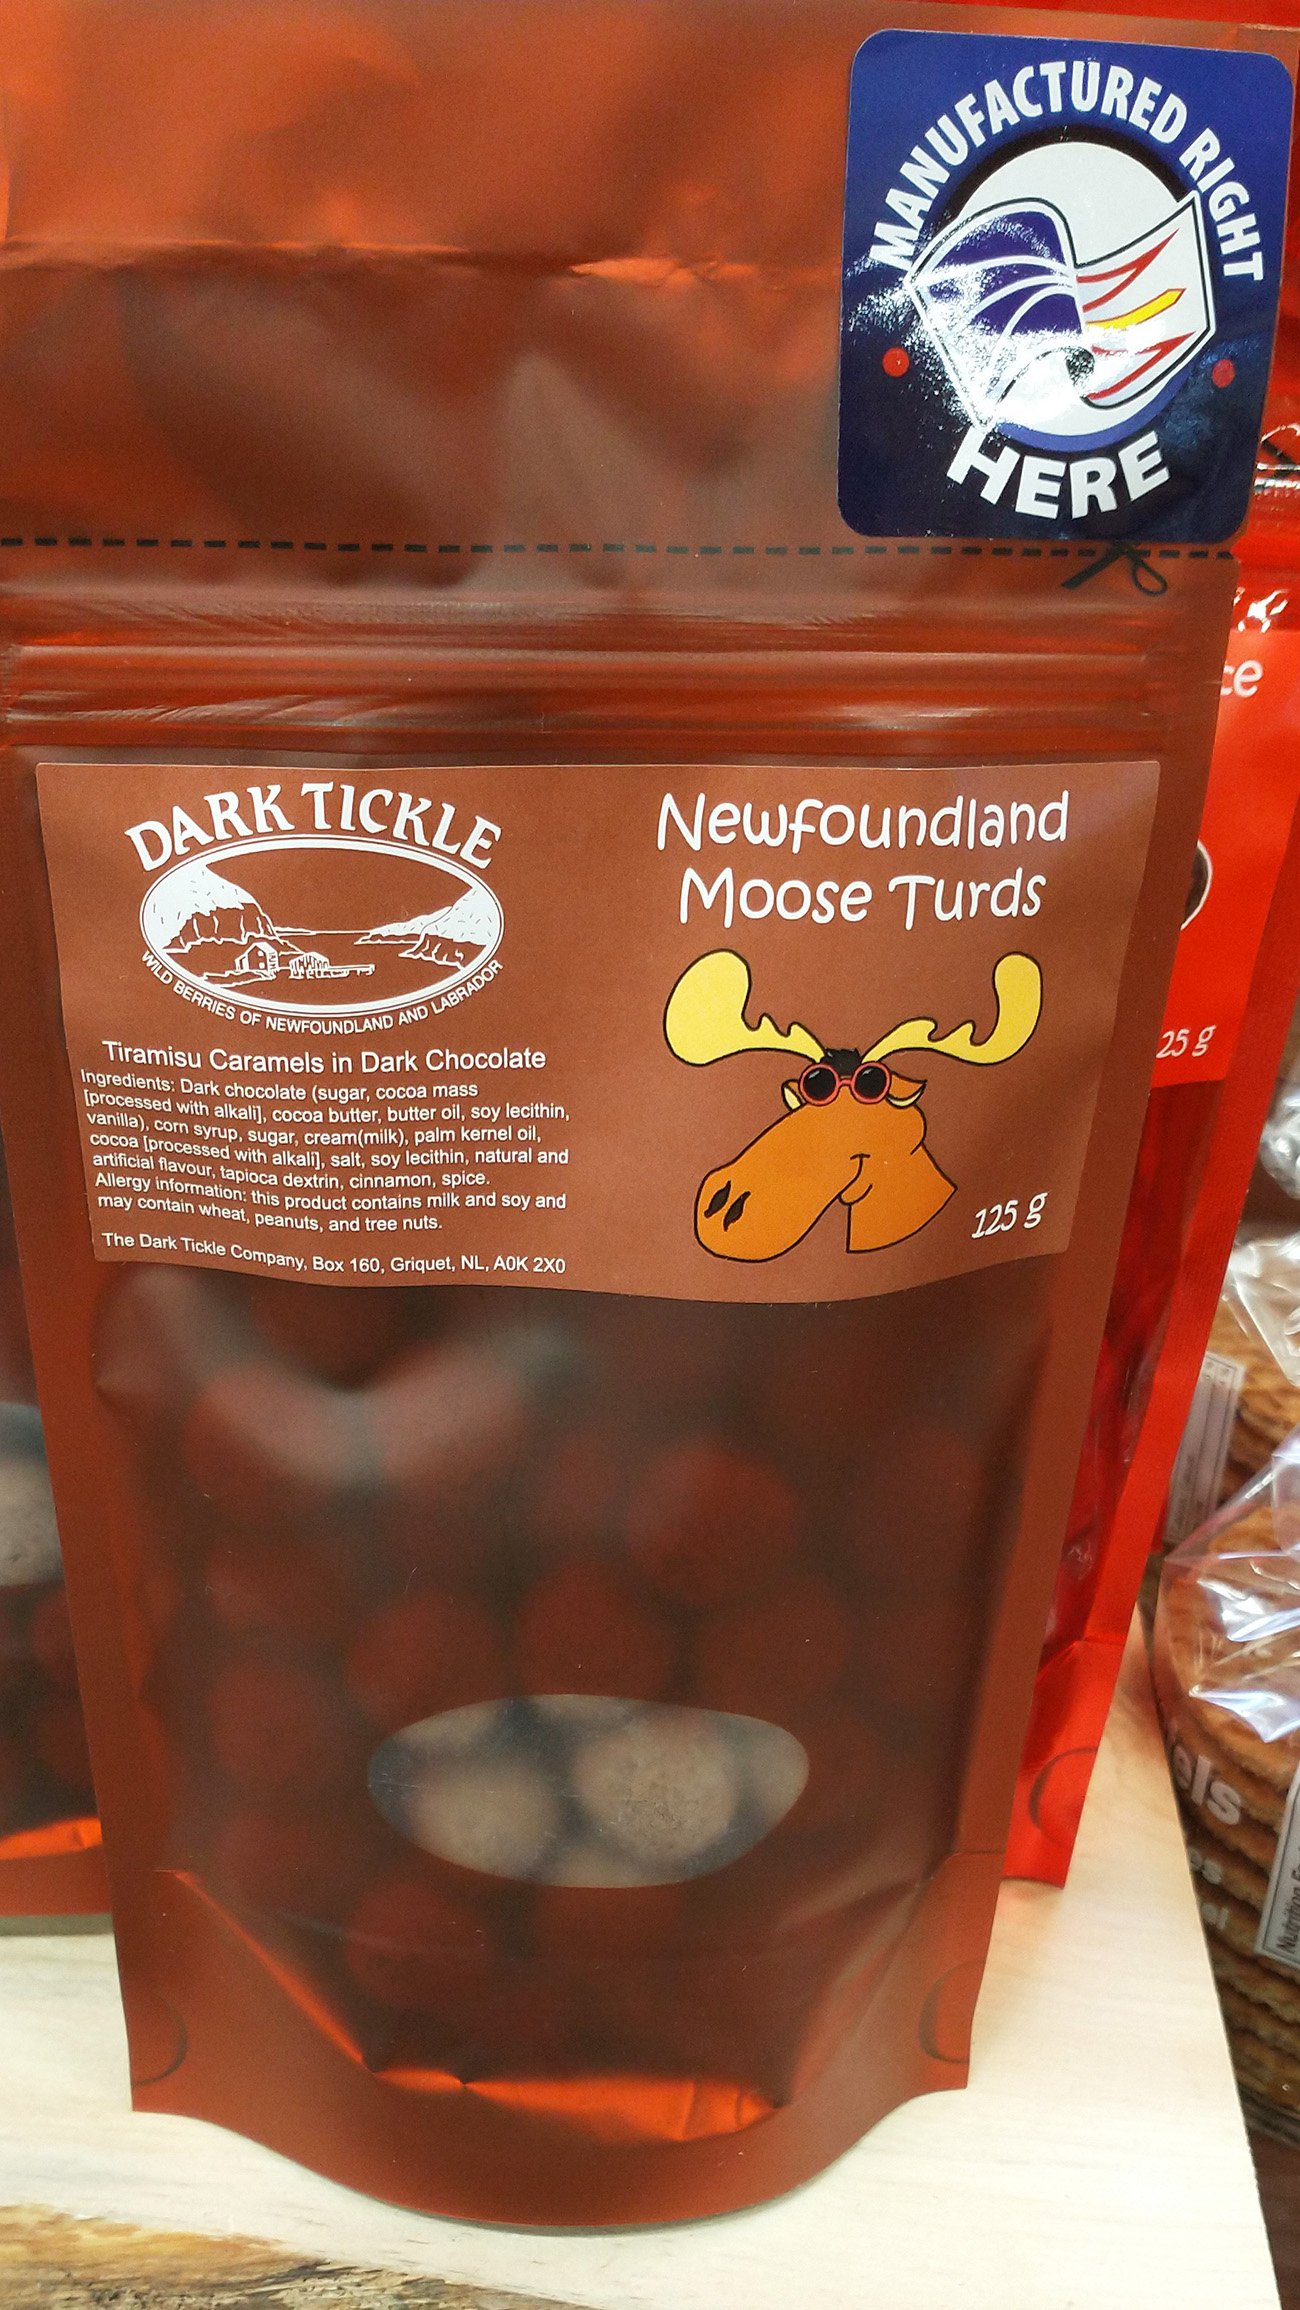 Went to shop for gifts that night. Lots of moose themed things on the island. They really amp up how moose infested they are.